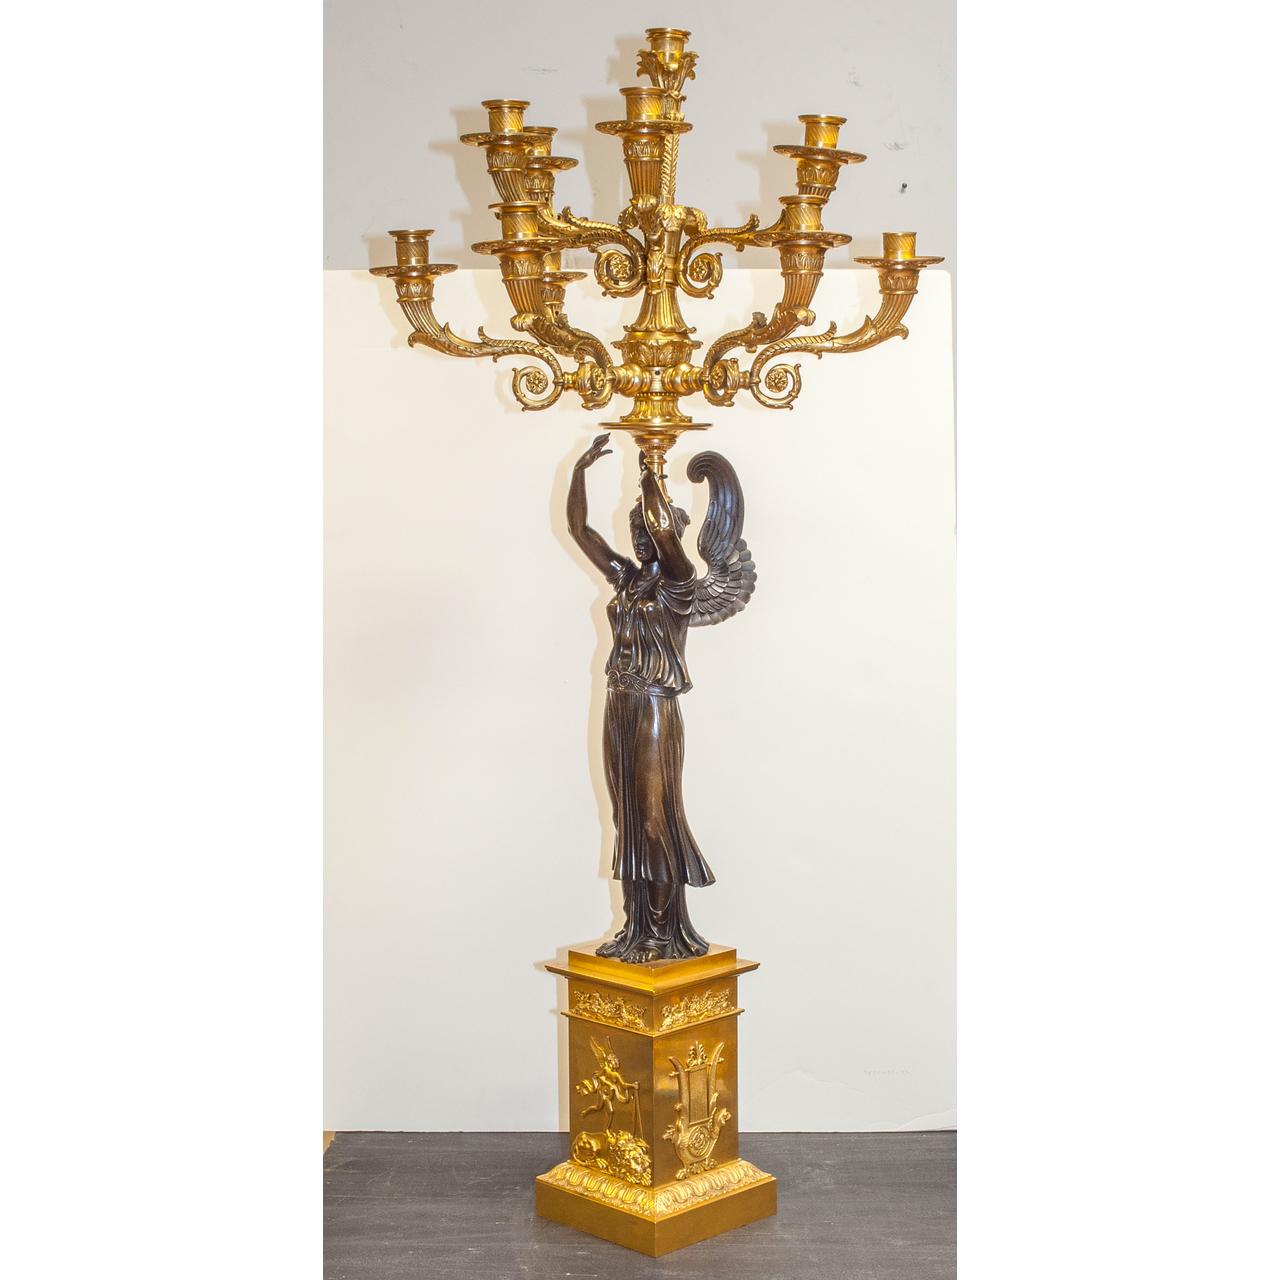 A magnificent pair of Empire ormolu and patinated bronze figural ten-light candelabra

Date: 19th century
Origin: French
Size: 40 inches high.